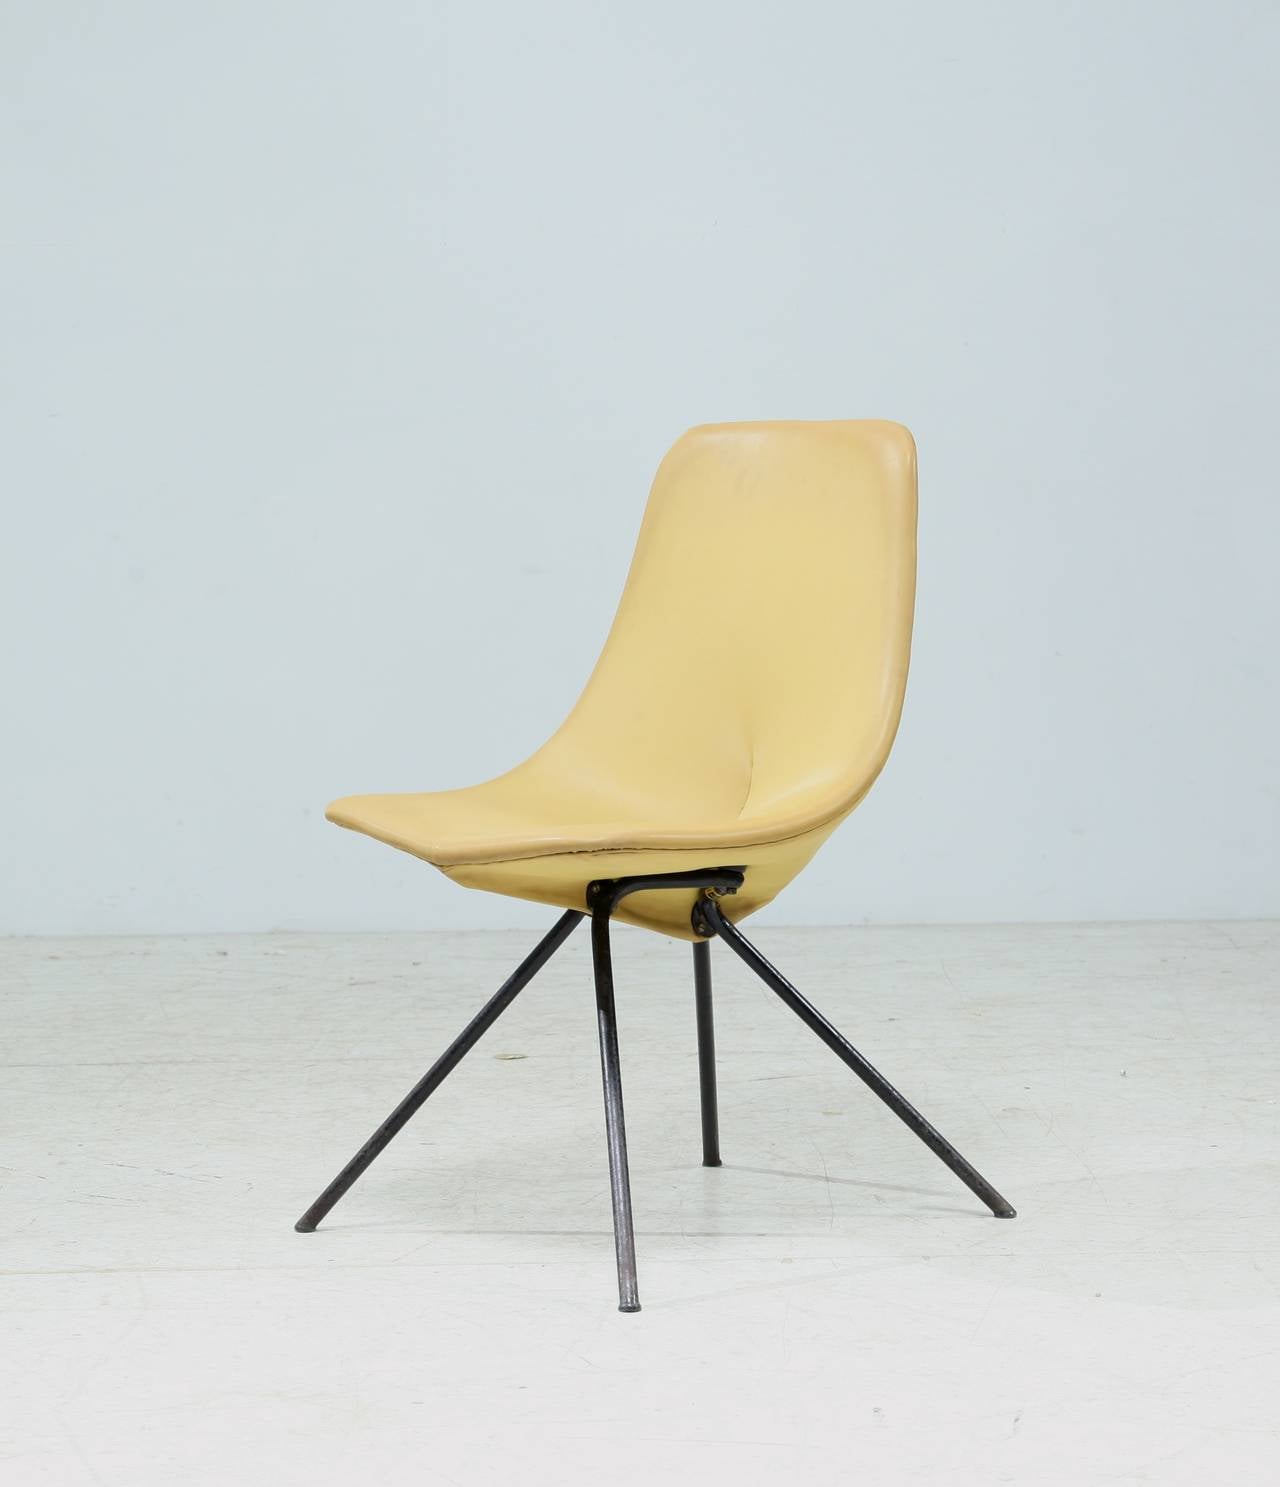 A rare Gastone Rinaldi 'DU 30' chair for RIMA, Italy with label.
Made of a black tubular metal base with a yellow vinyl covered seat.
This design was the winner of the Compasso d'oro award of 1954.